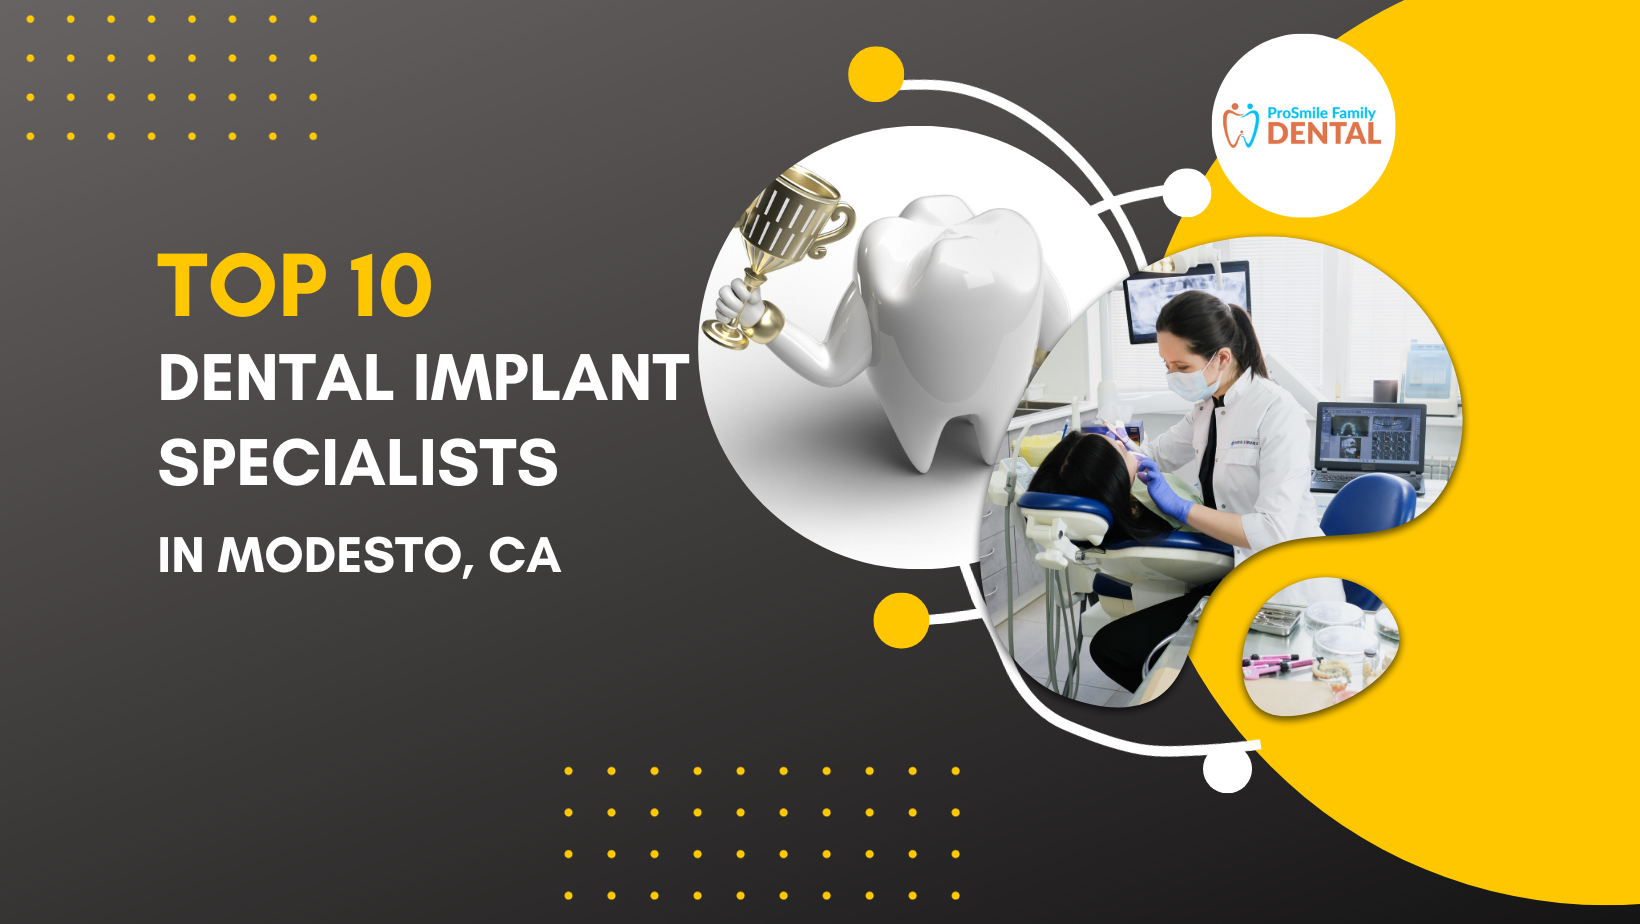 Top Dental Implant Specialists in Modesto, CA